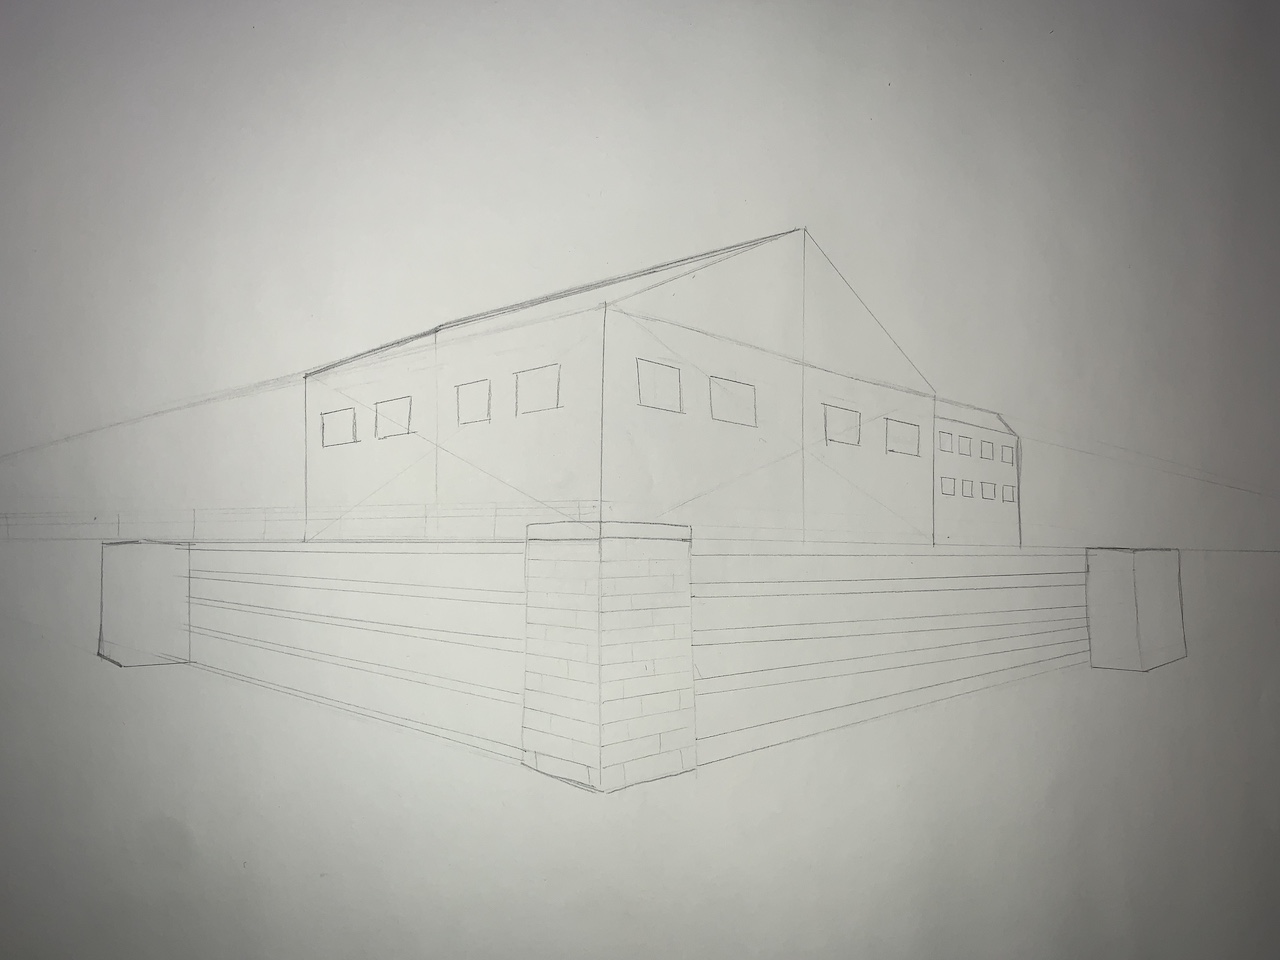 two point perspective